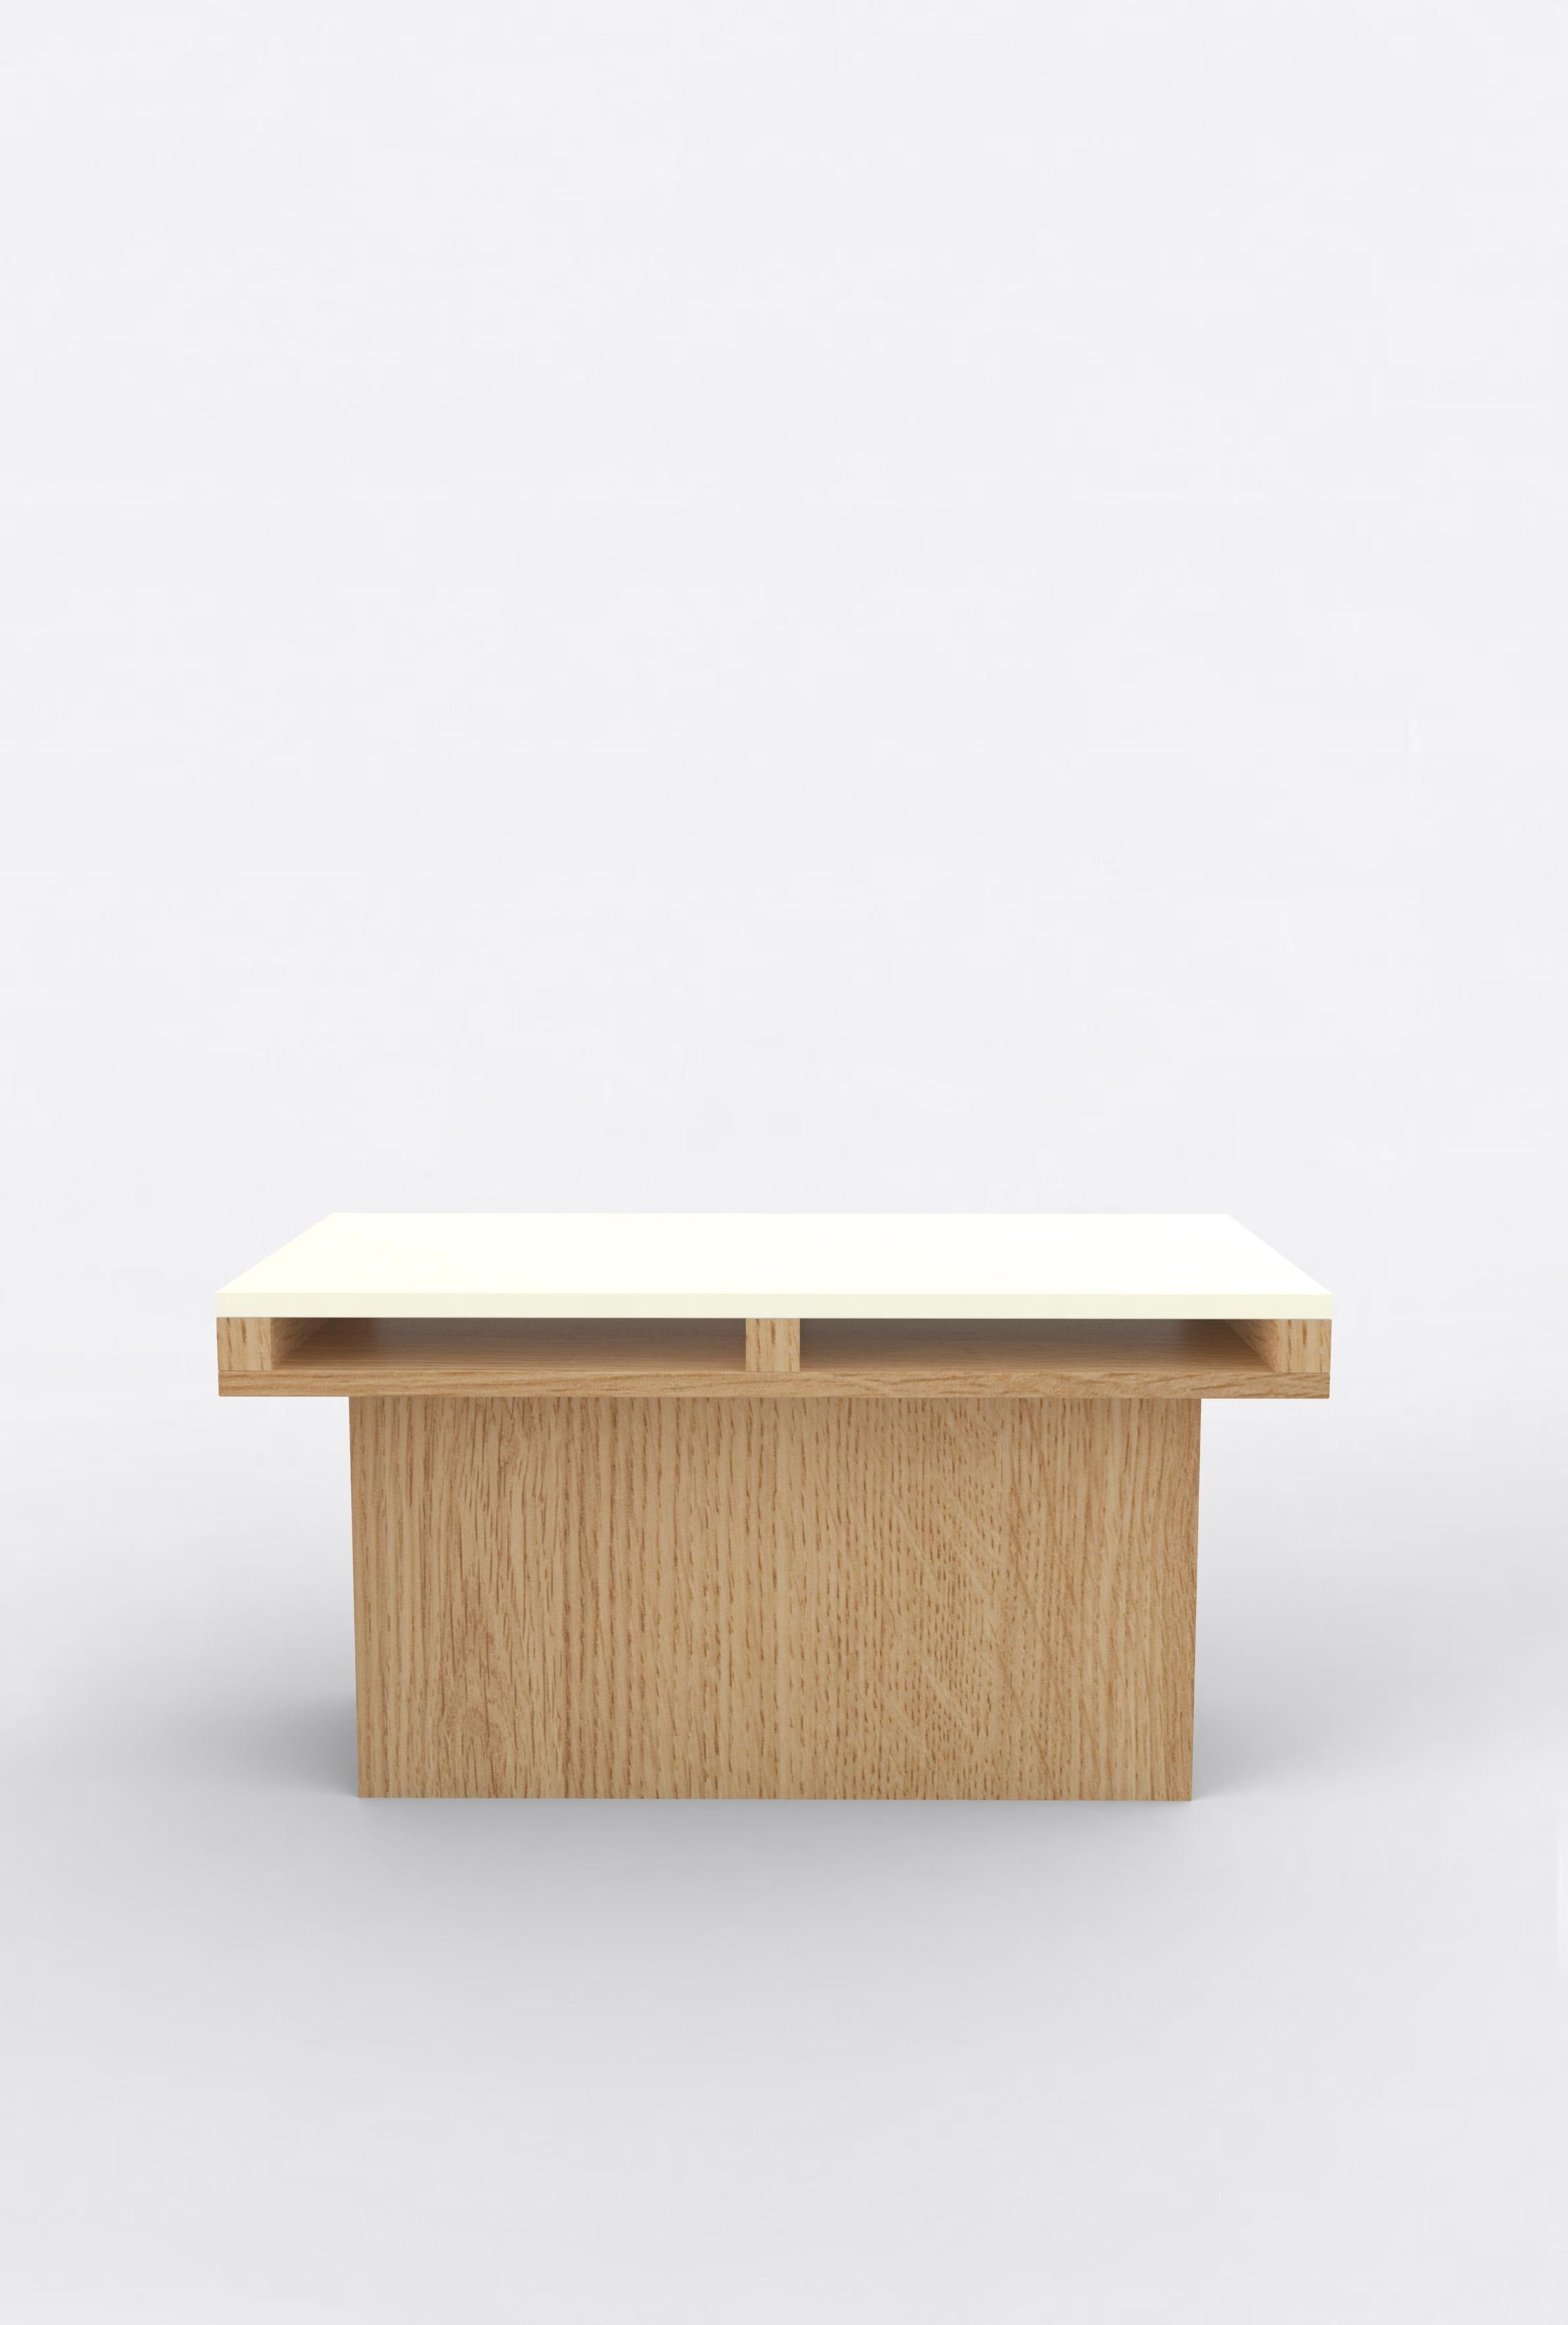 Orphan Work 102 End Table
Shown in oak and white and off-white
Available in natural oak with painted top
Measures: 31” L x 15” D x 15” H

Orphan work is designed to complement in the heart of Soho, New York City. Each piece is handmade in New York